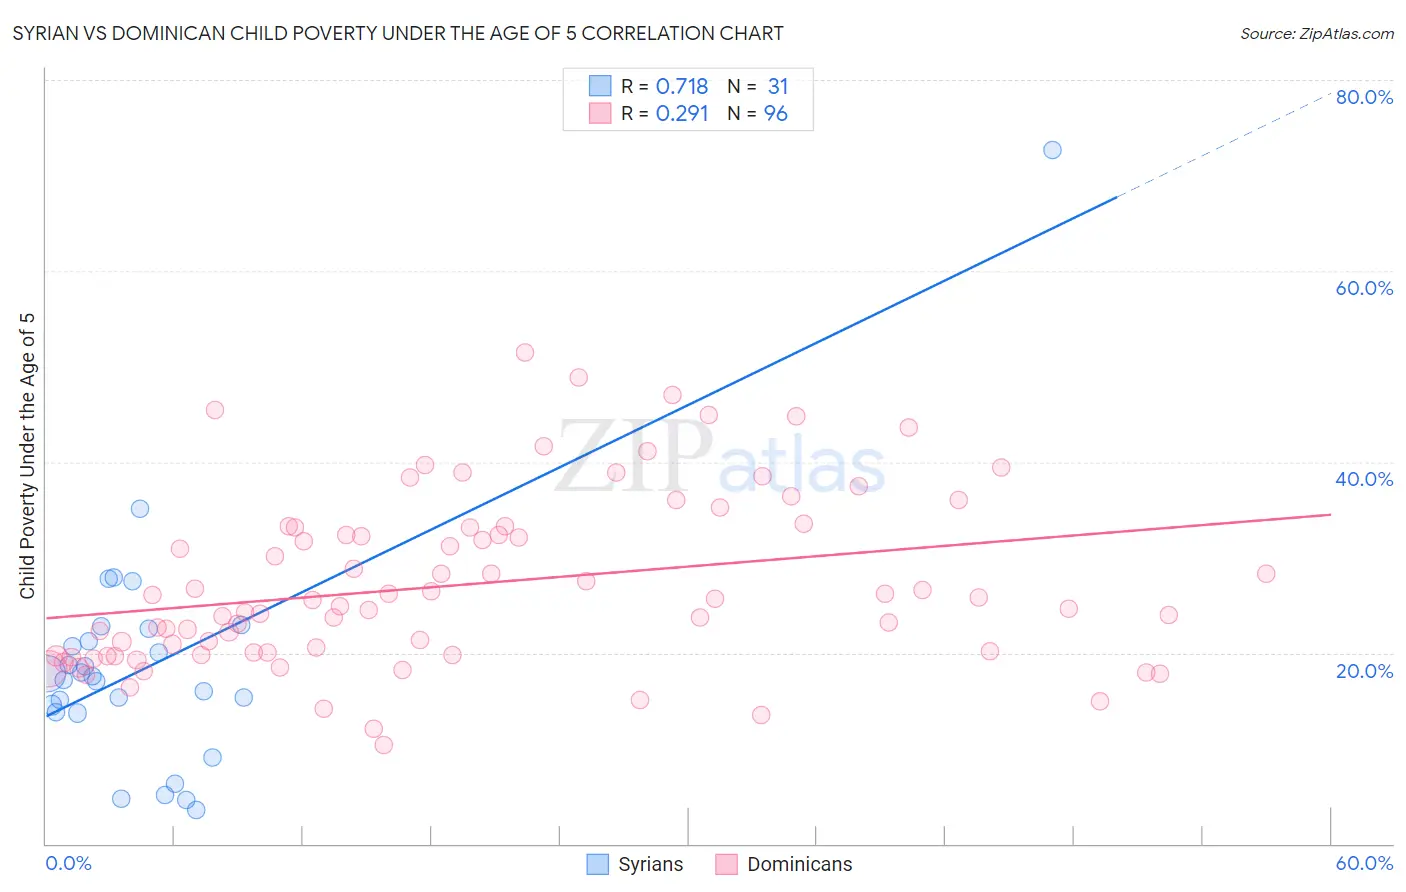 Syrian vs Dominican Child Poverty Under the Age of 5